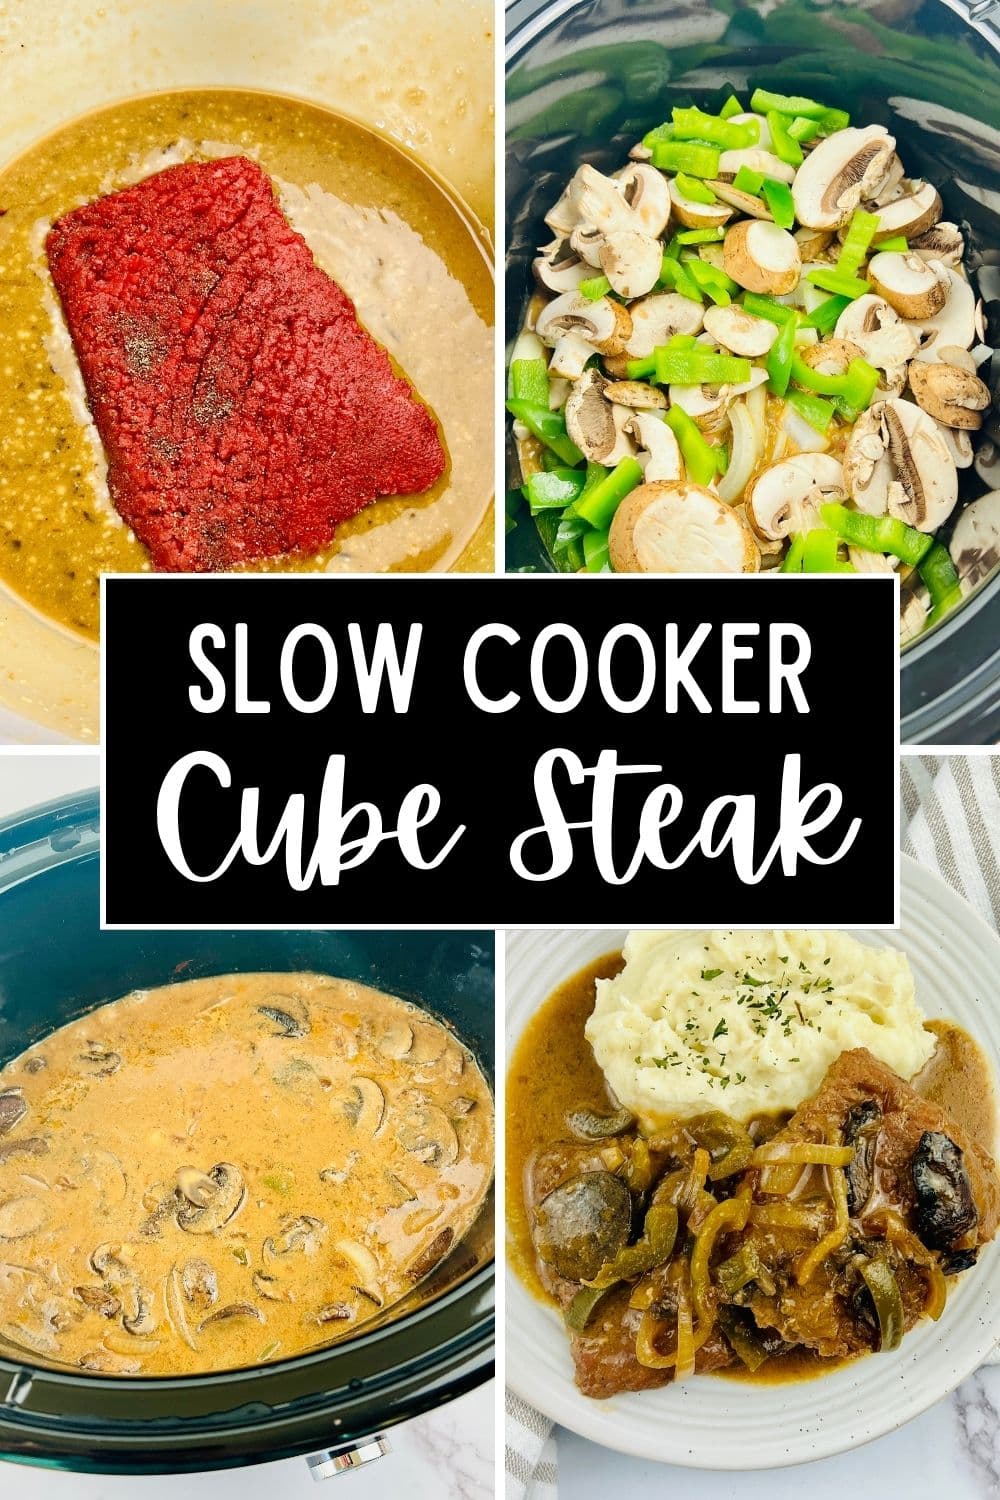 Prepare a delicious dinner in advance with this easy recipe for Slow Cooker Cube Steak.